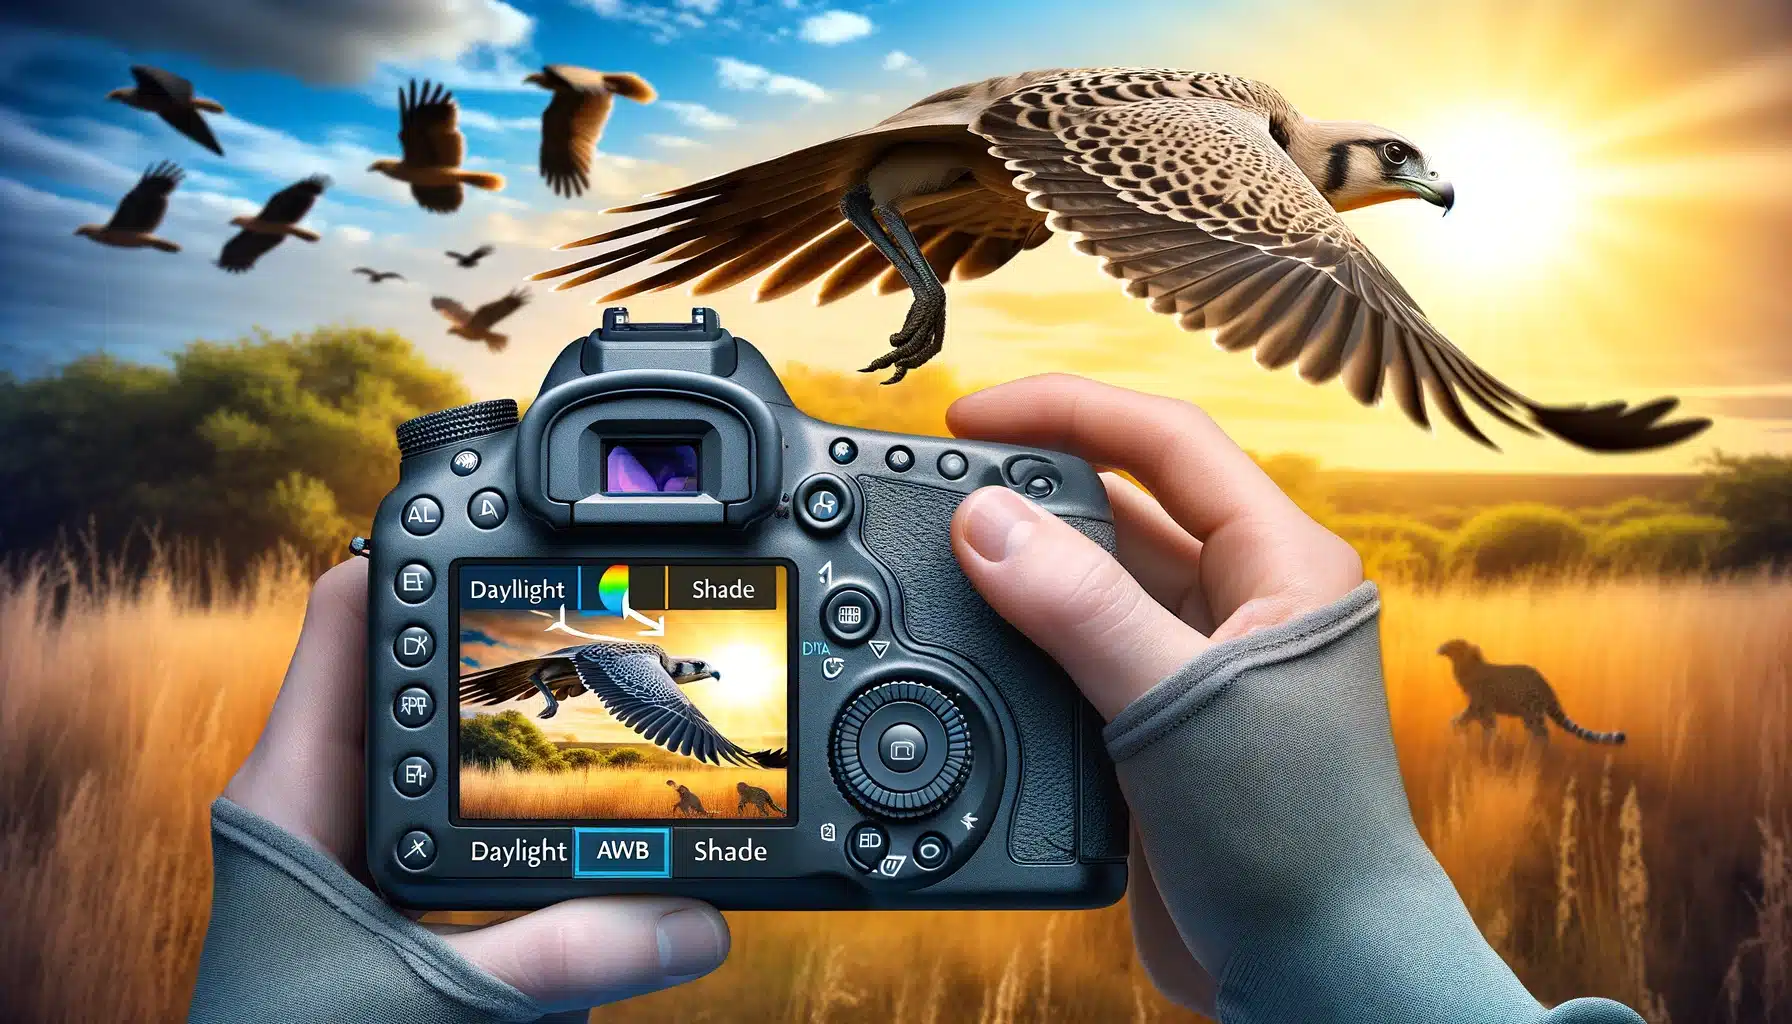 Photographer adjusting white balance from Daylight to Shade while capturing a bird in flight, showcasing manual control over automatic settings.